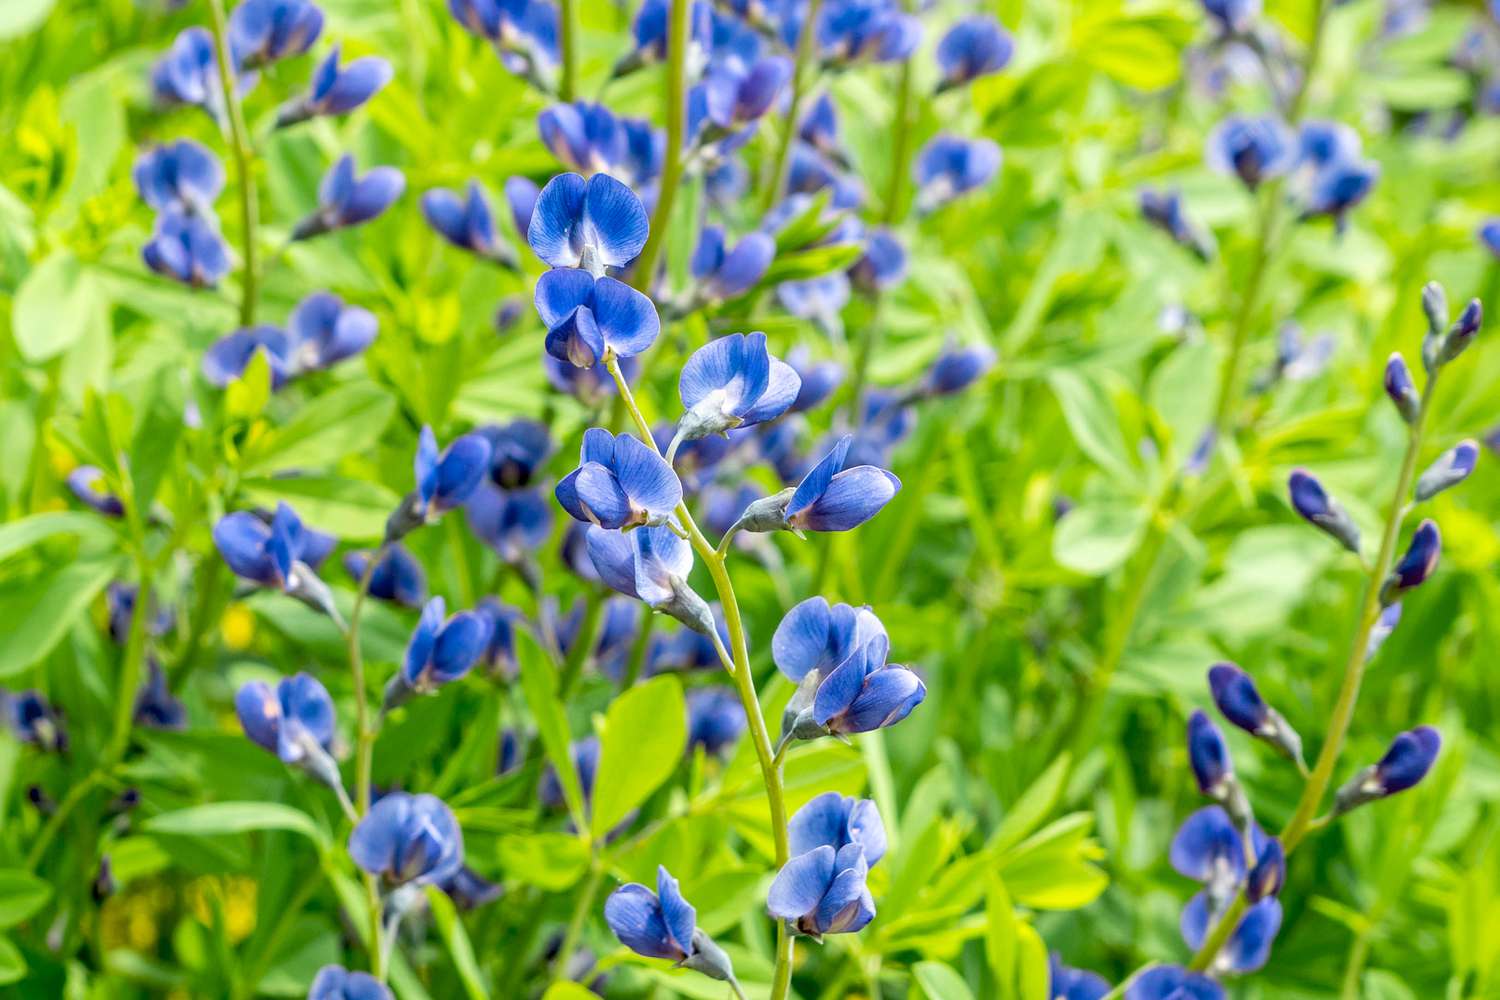 False indigo with deep blue flowers on thin stems with bright green leaves